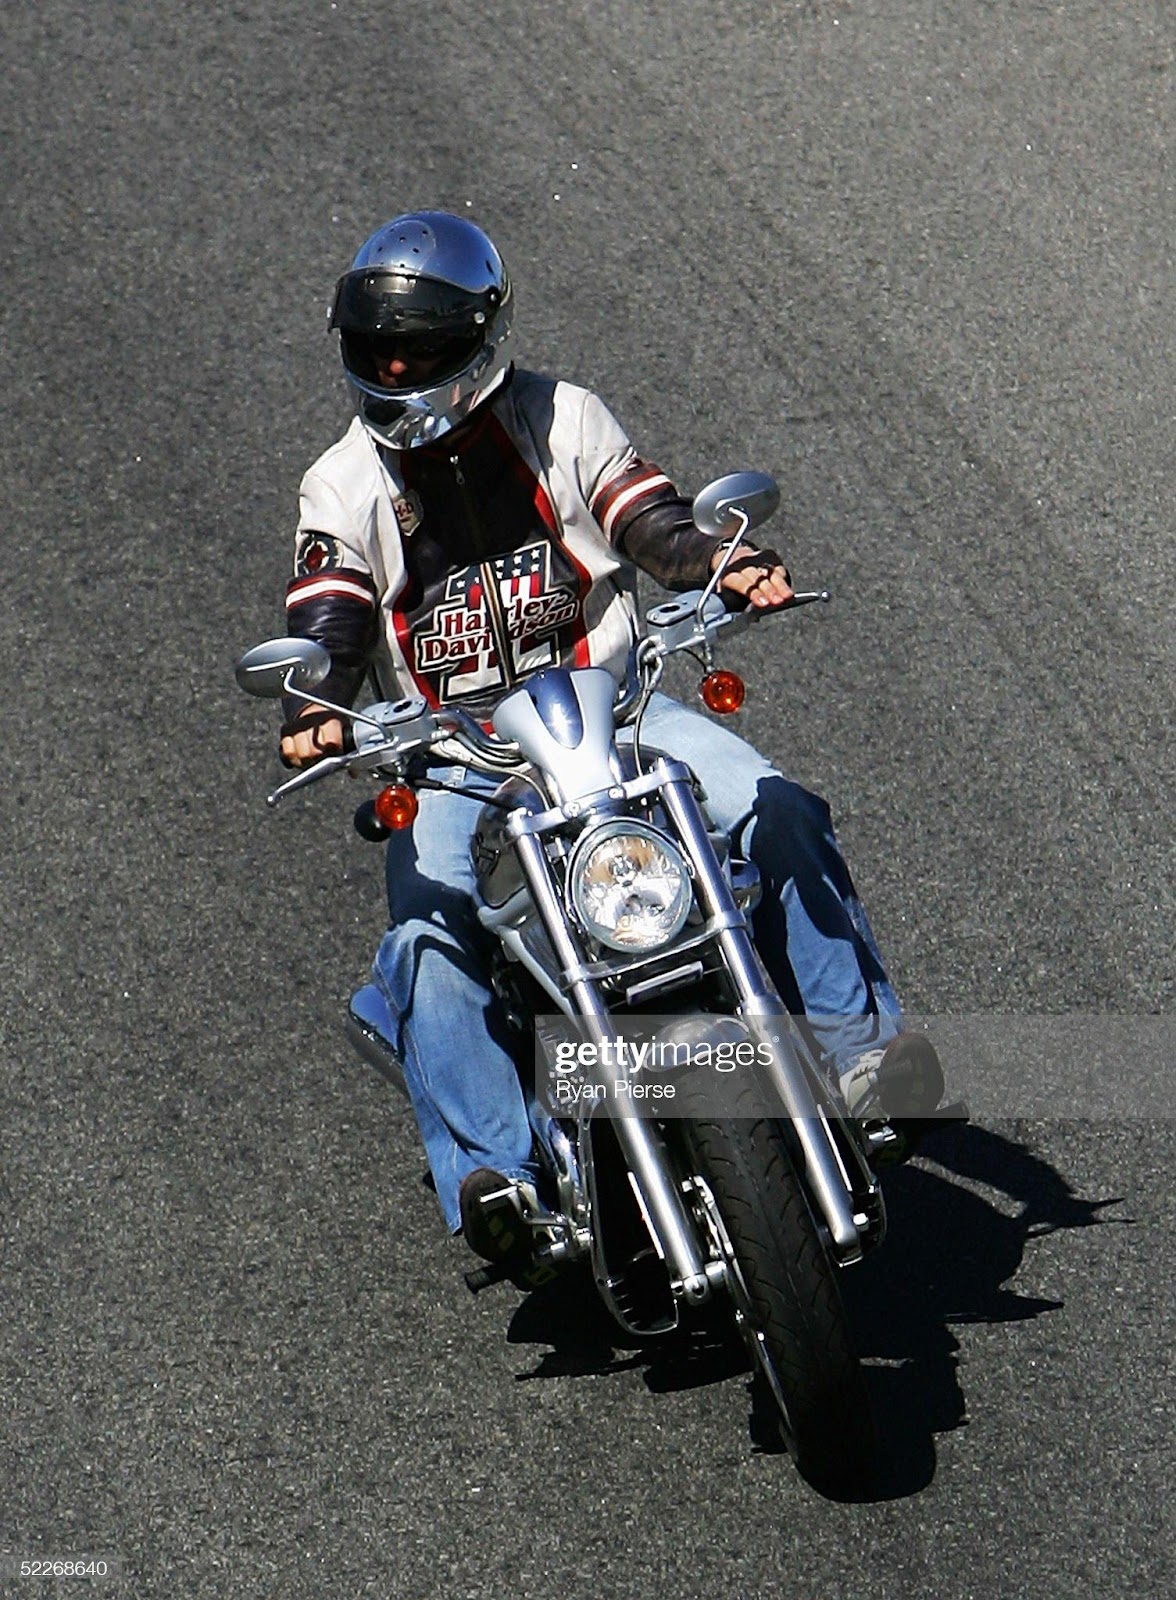 Michael Schumacher rides his Harley Davidson motorcycle prior to the Australian F1 Grand Prix on March 3, 2005 in Melbourne.